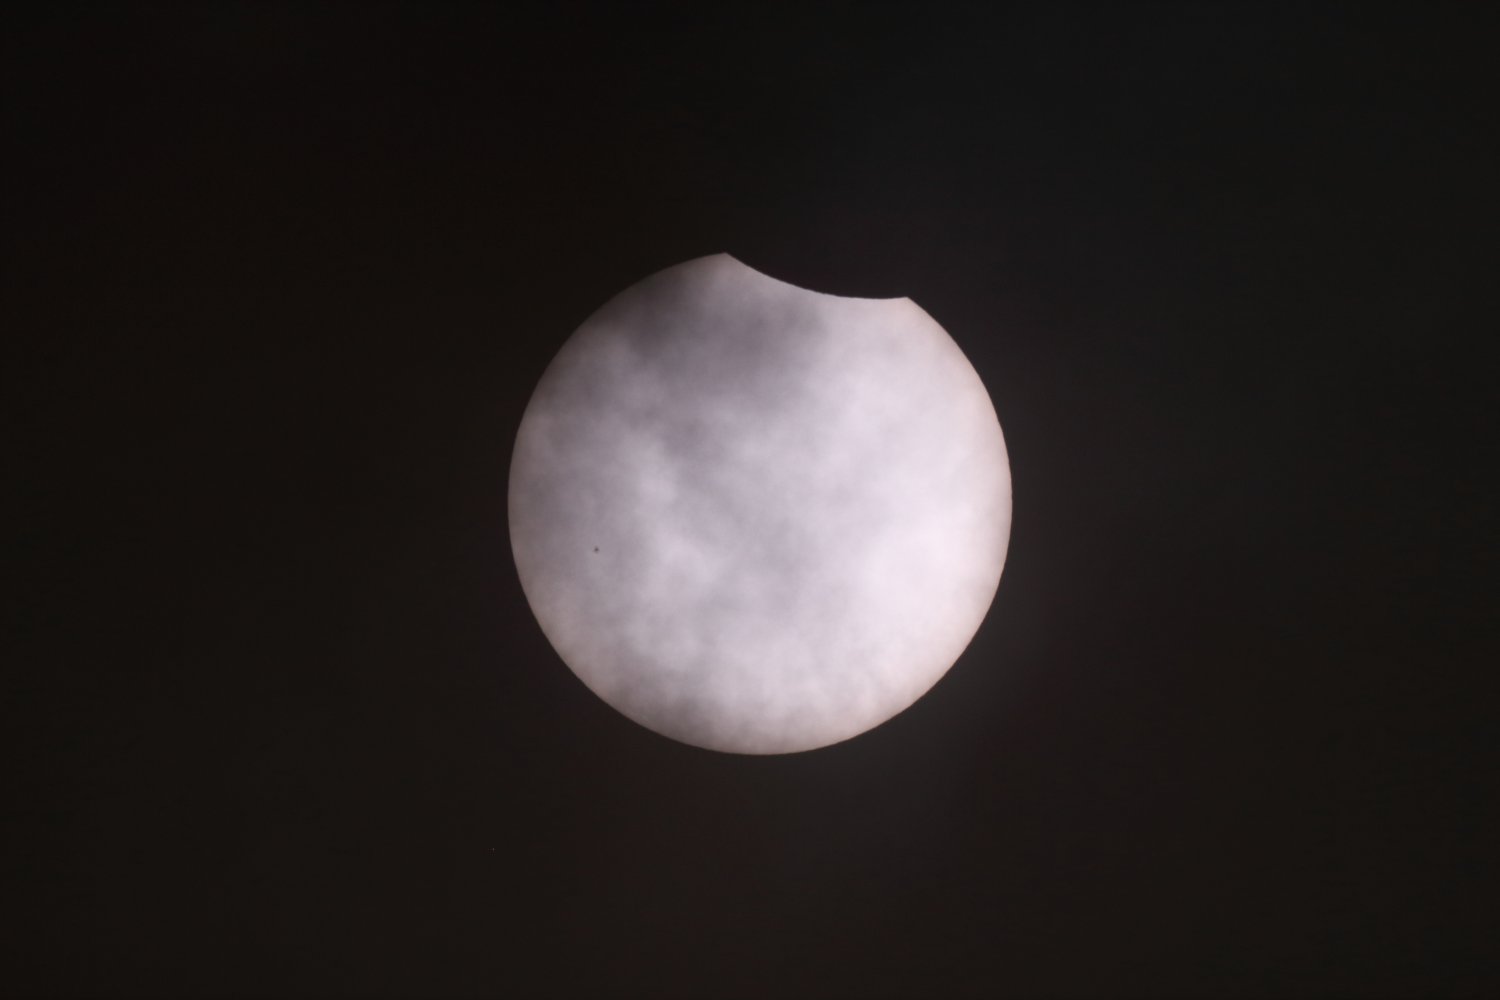 Partial eclipse 
photographed from Talmassons: 45 KB; click on the image to enlarge